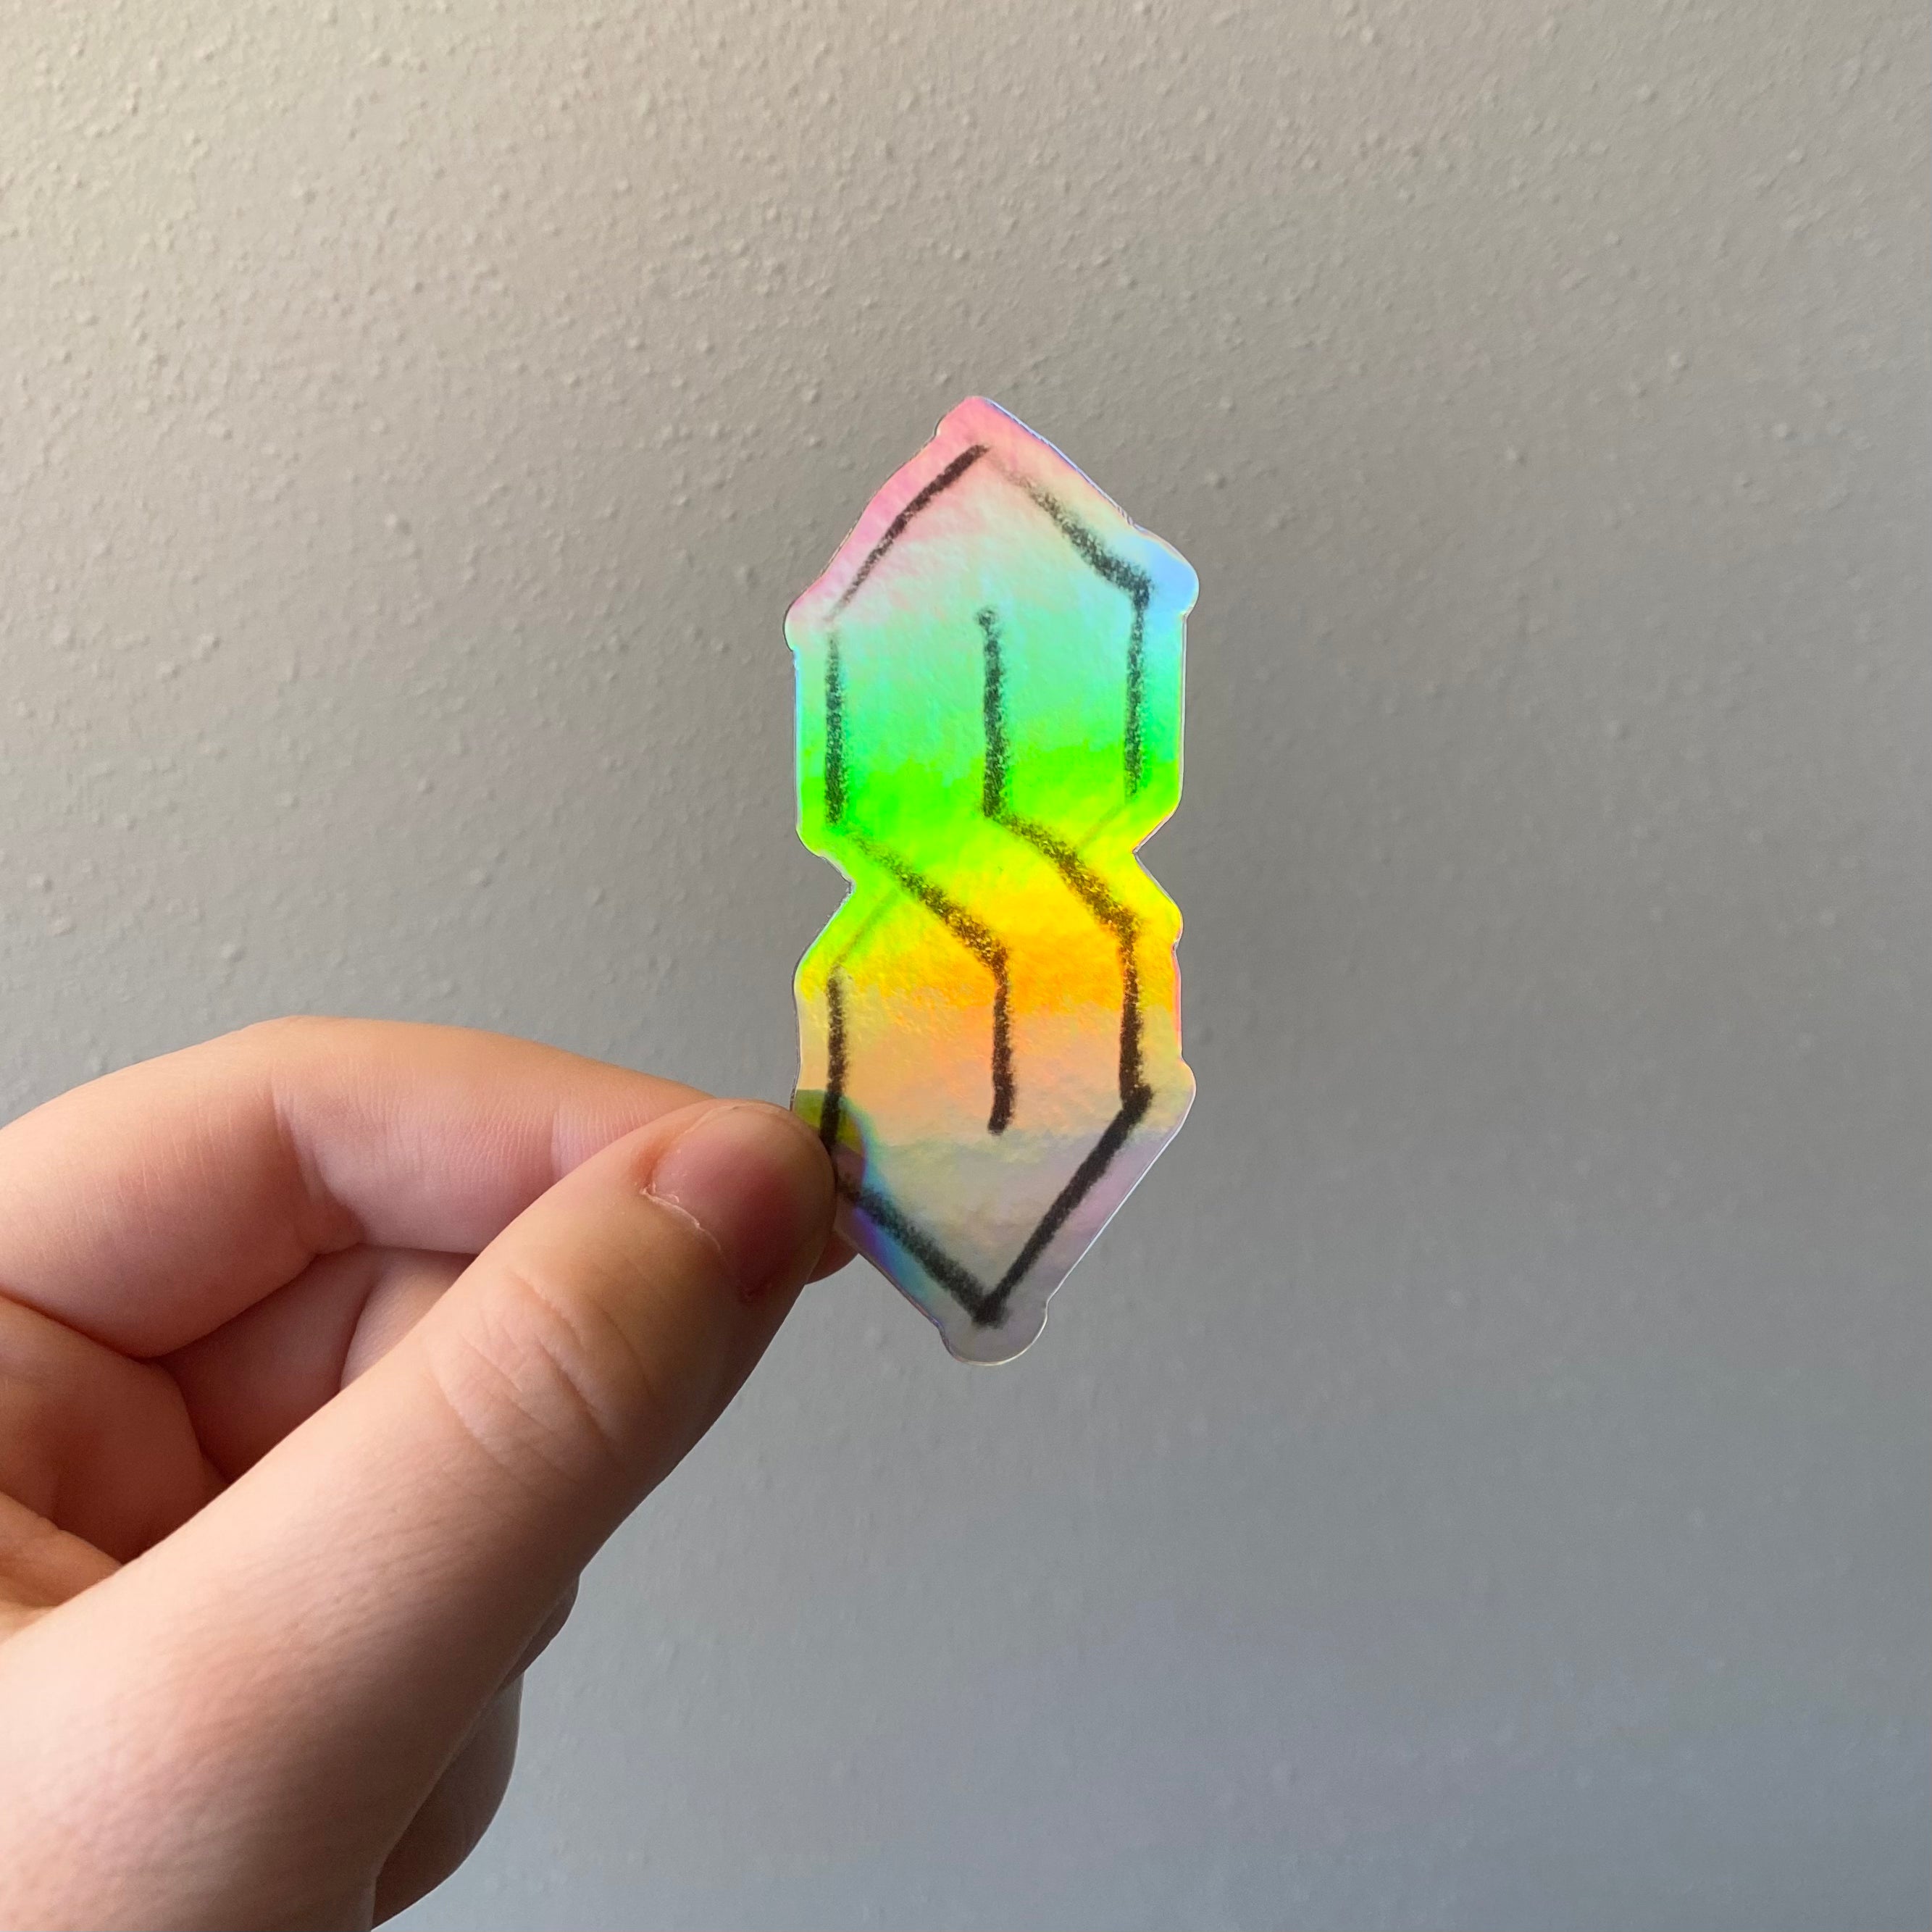 The Cool S Holographic Vinyl Sticker